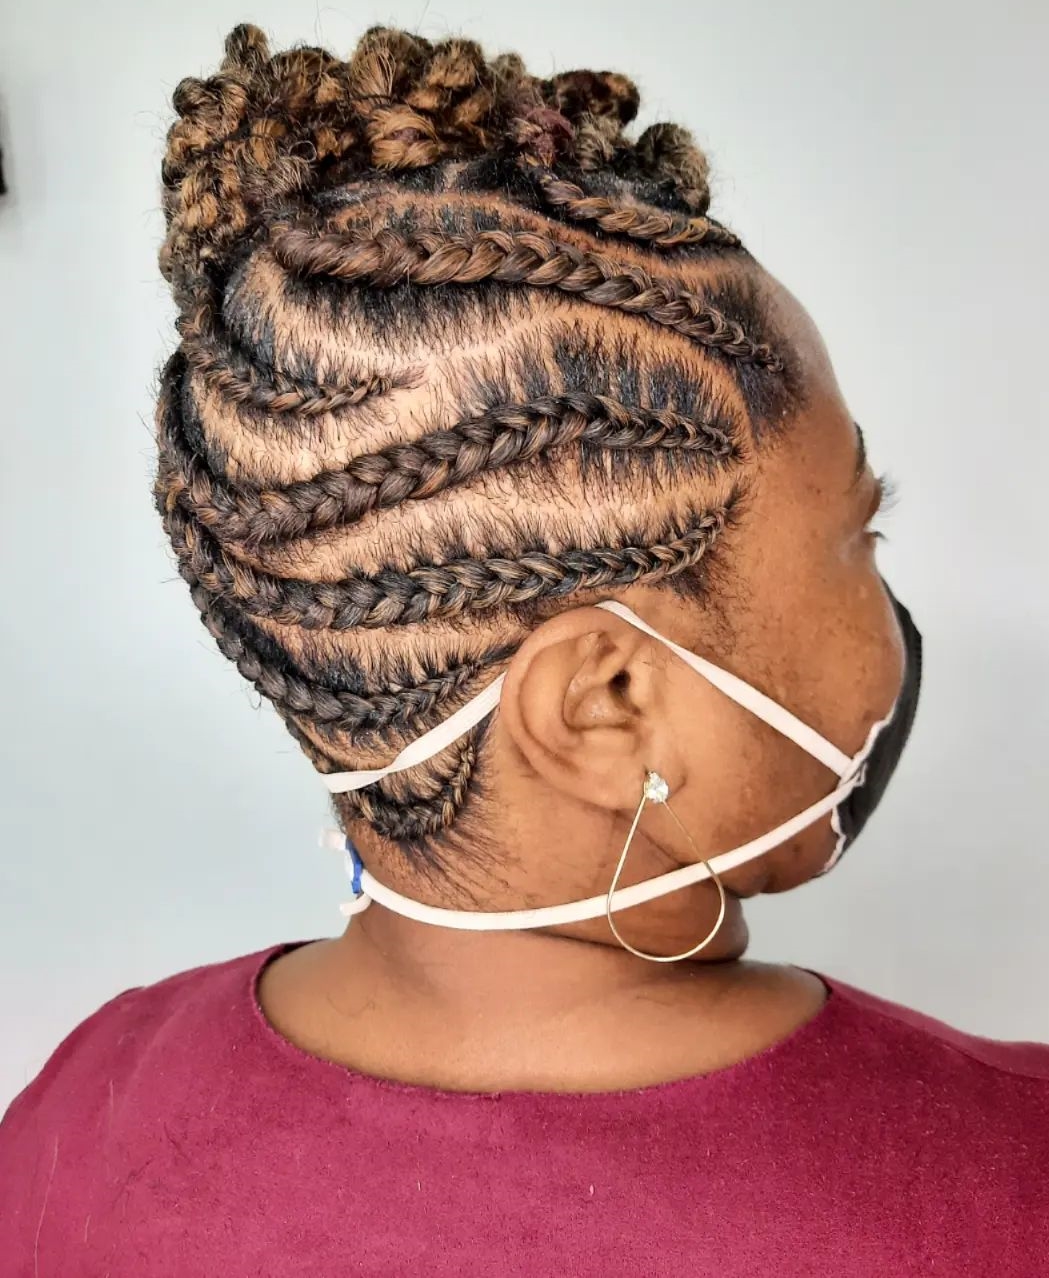 Stitch Braids on Short Hair with Copper Highlight